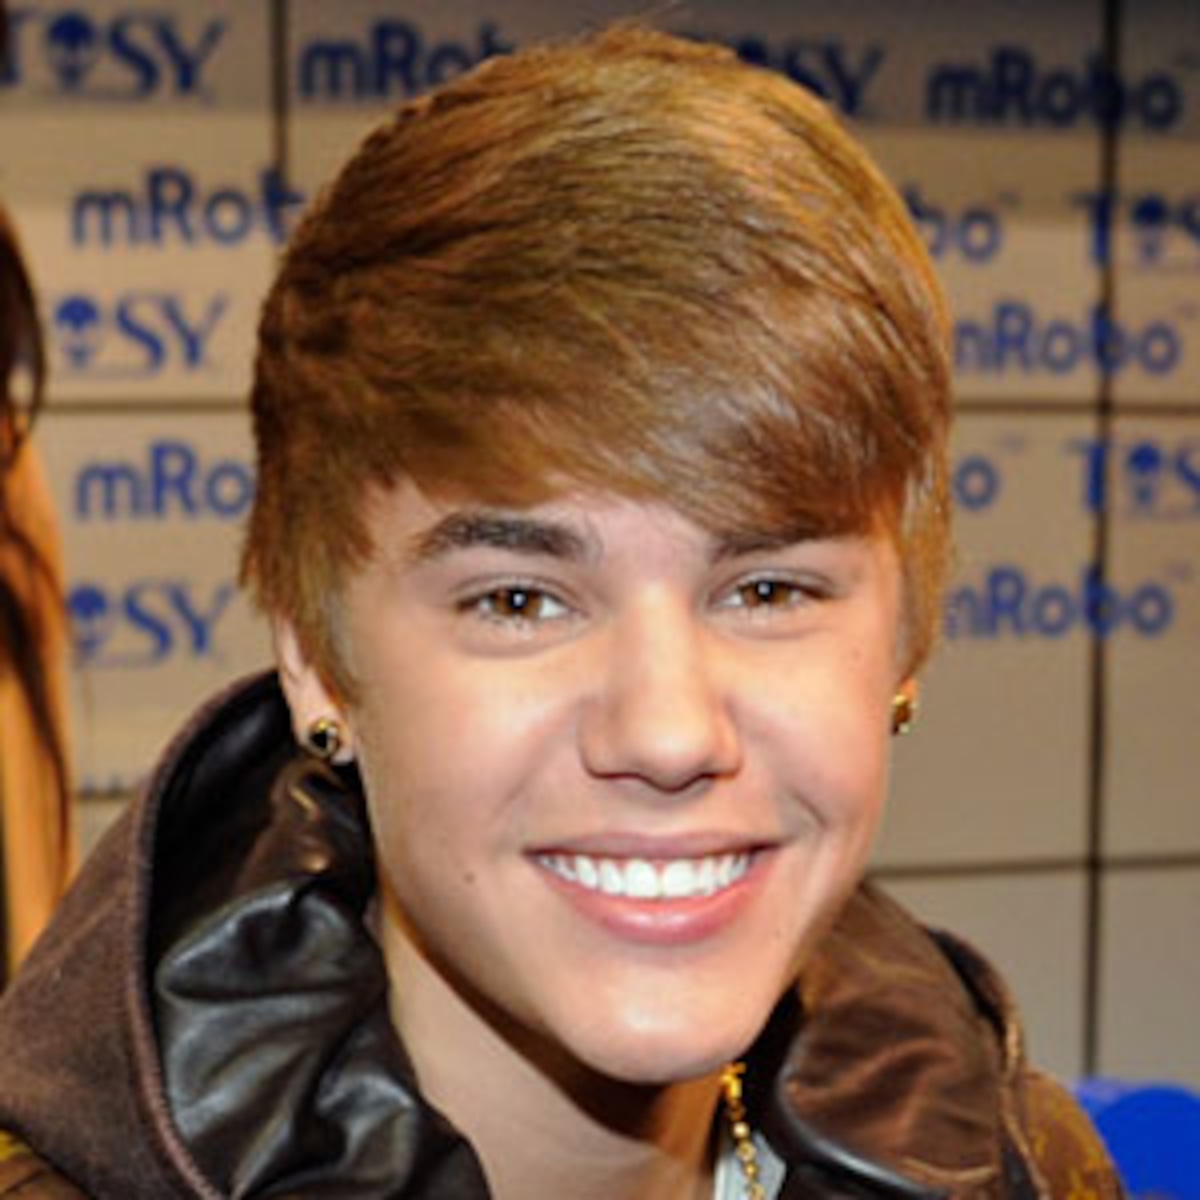 Justin Bieber's New Hairstyle: The Trump? - E! Online